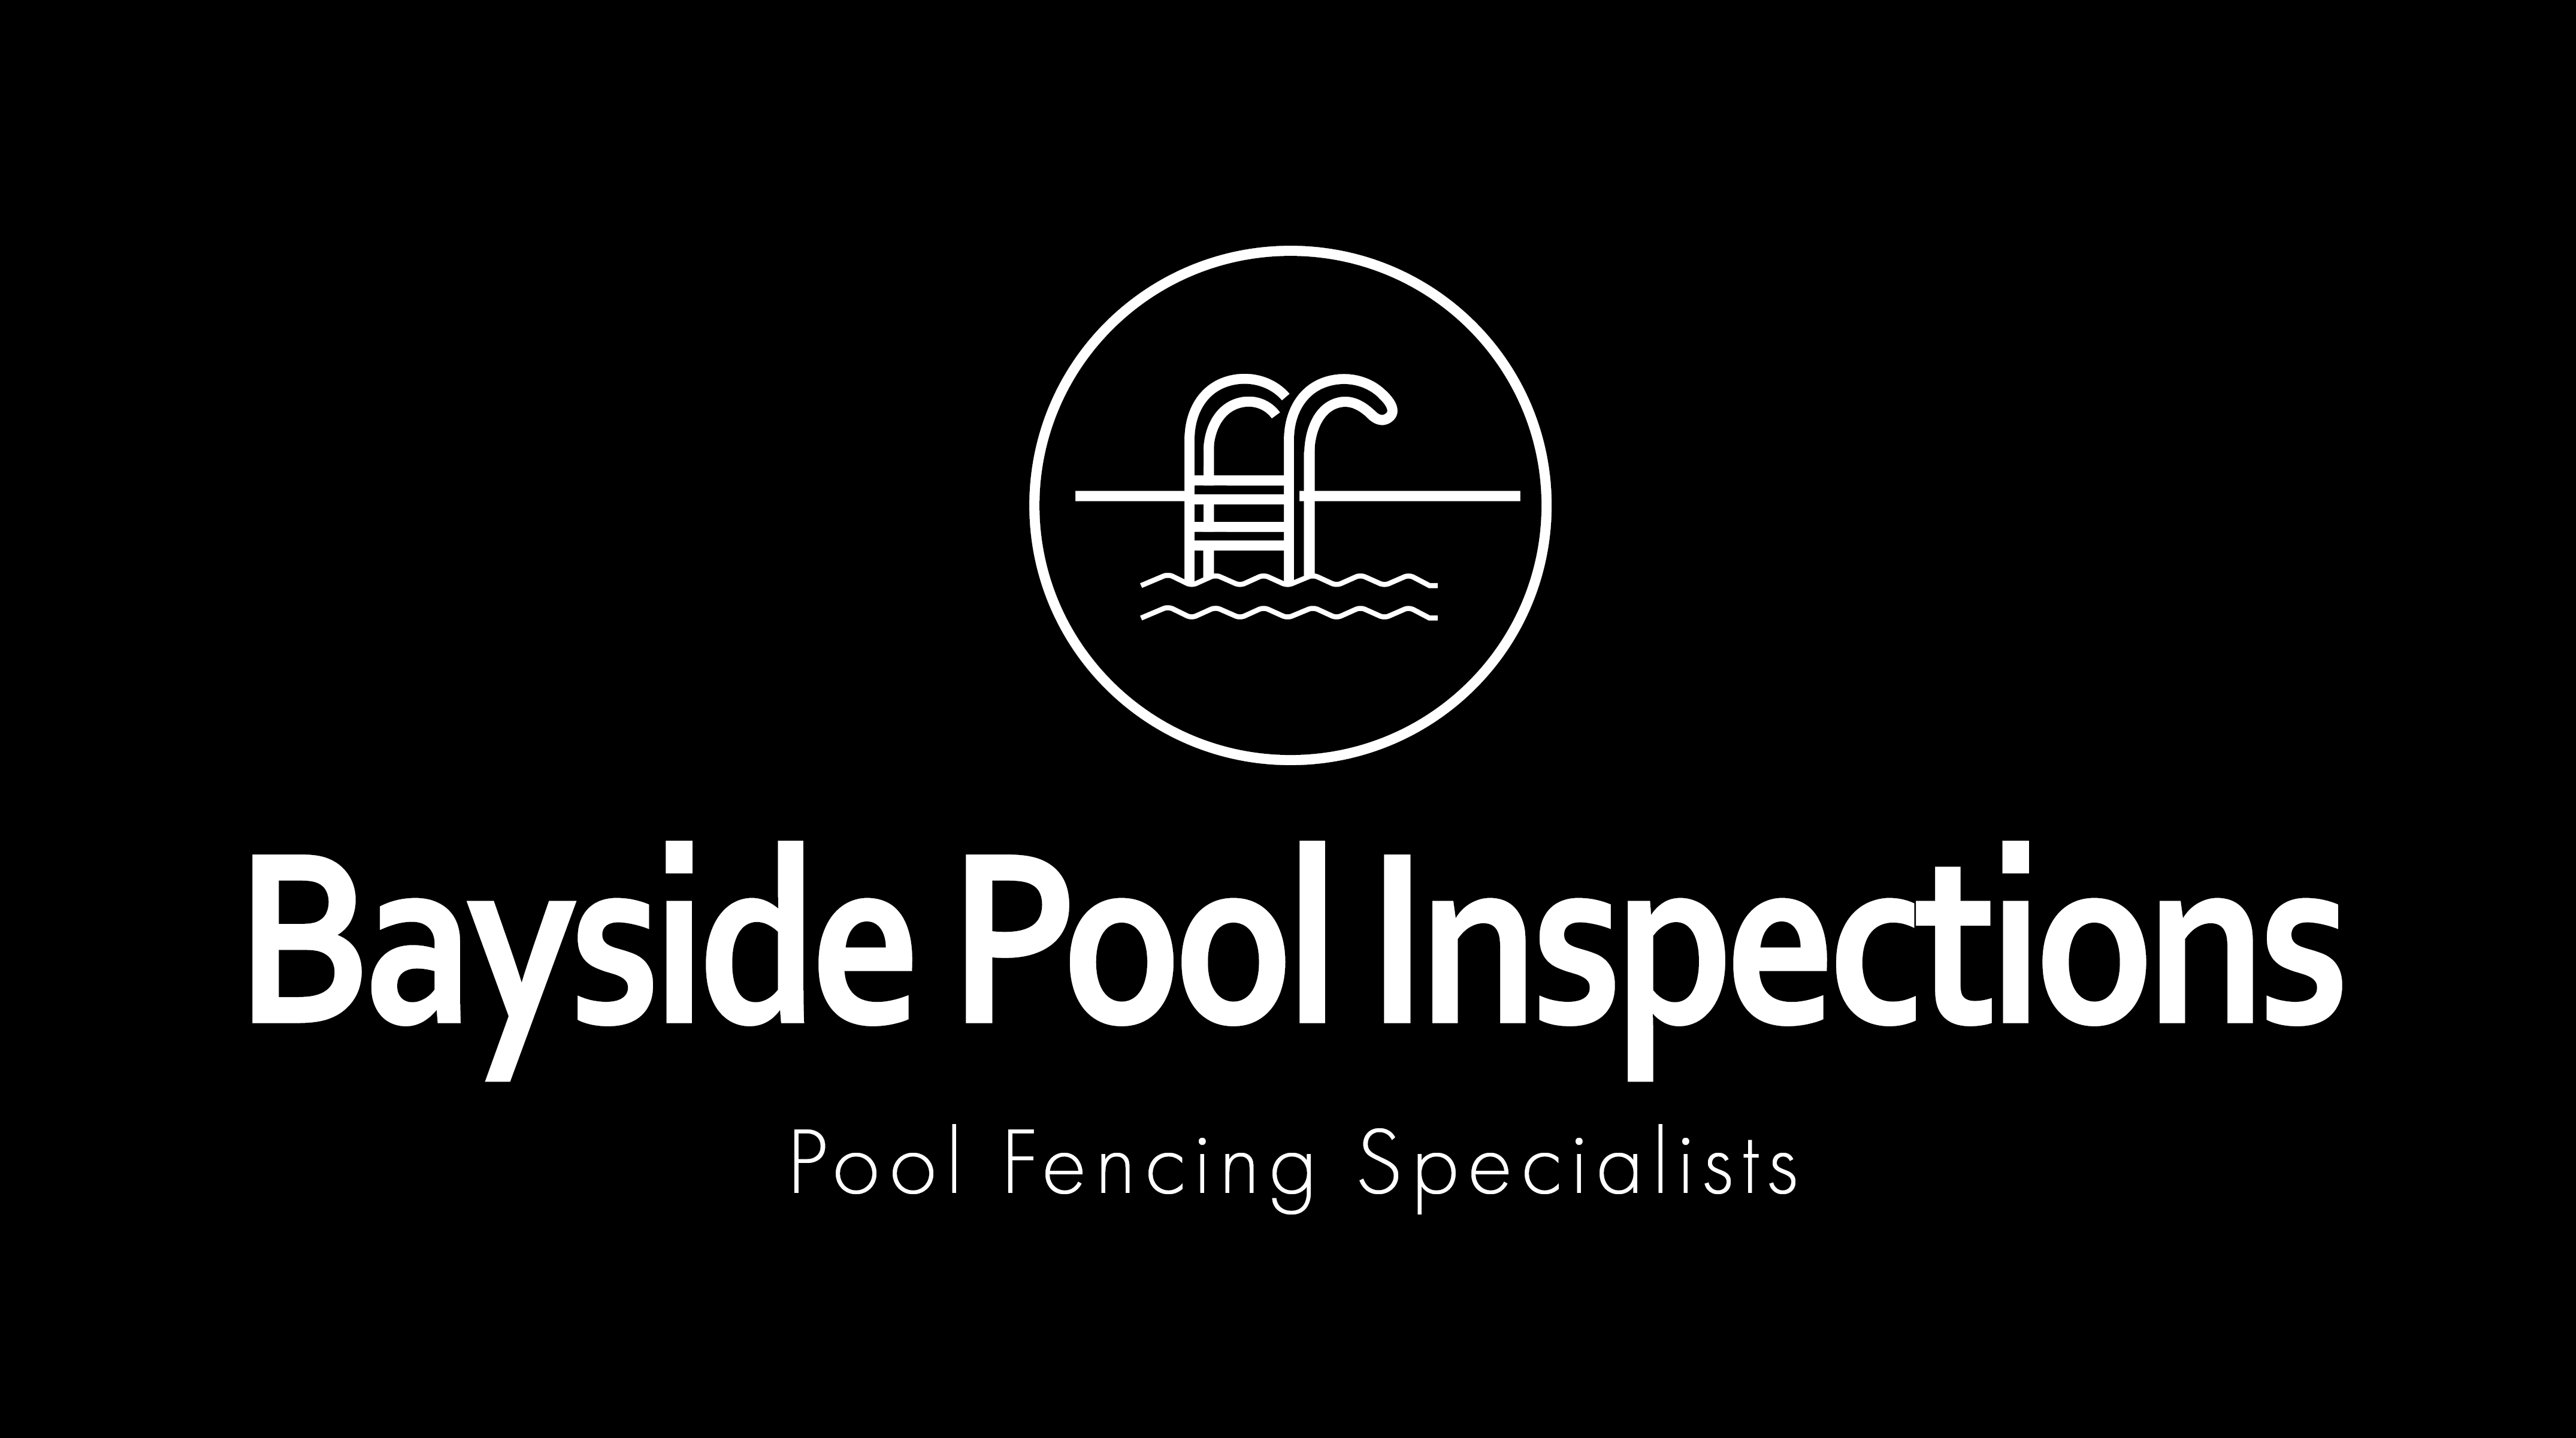 Bayside Pool Inspections